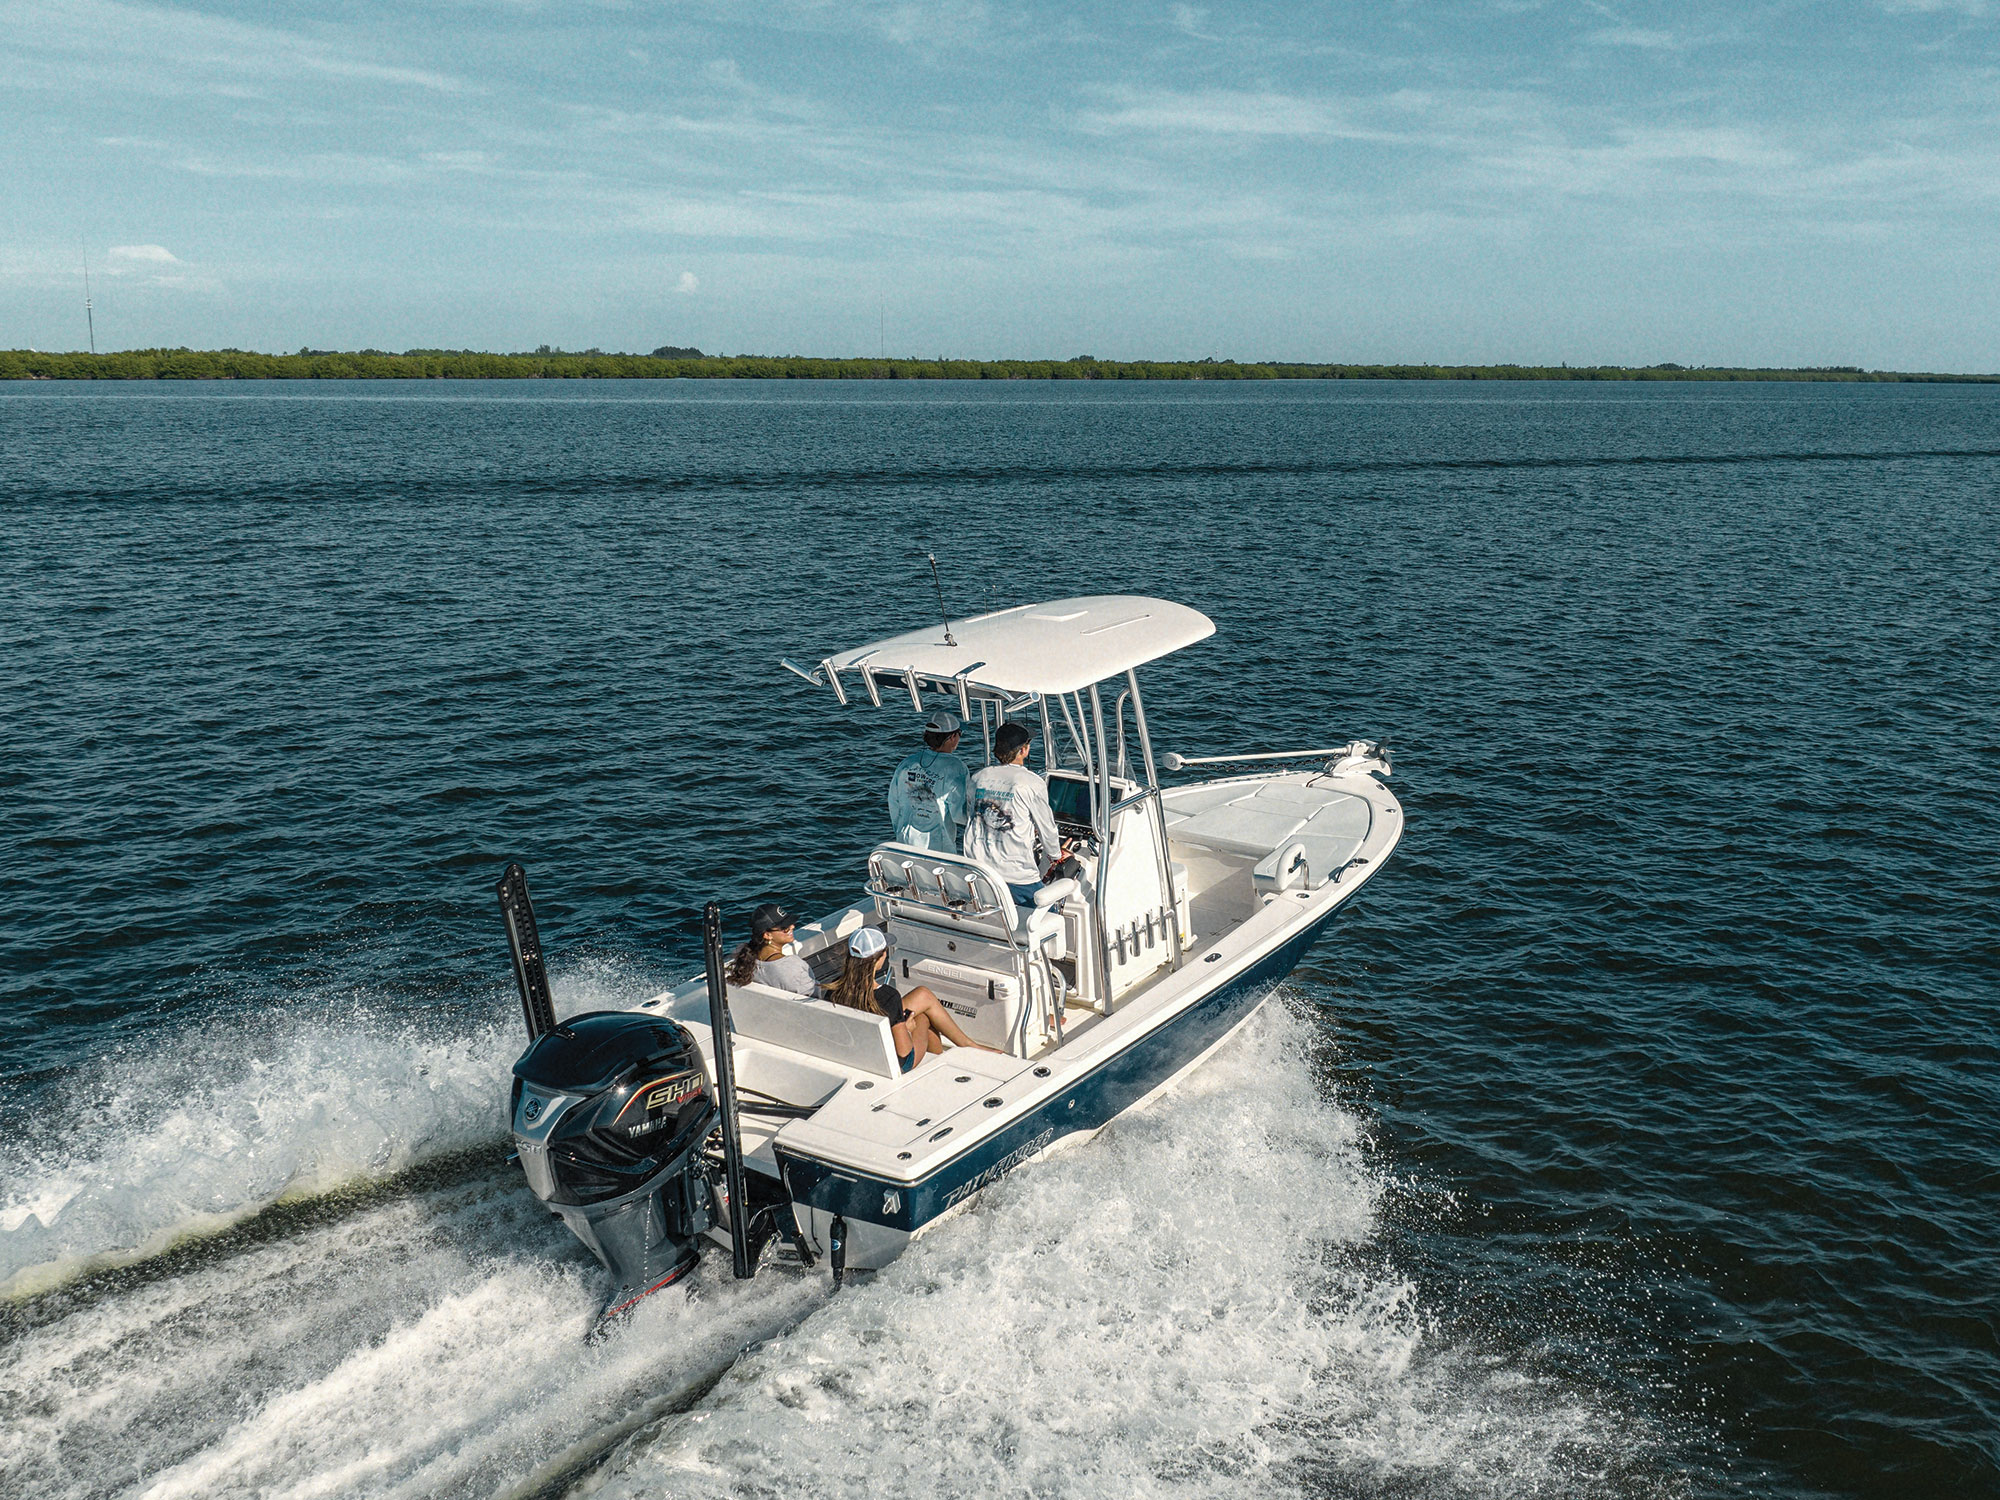 Fish hard and play easy on the Pathfinder 2600 TRS. #pathfinderboats  #anglerdriven #bayboat #family #fishing